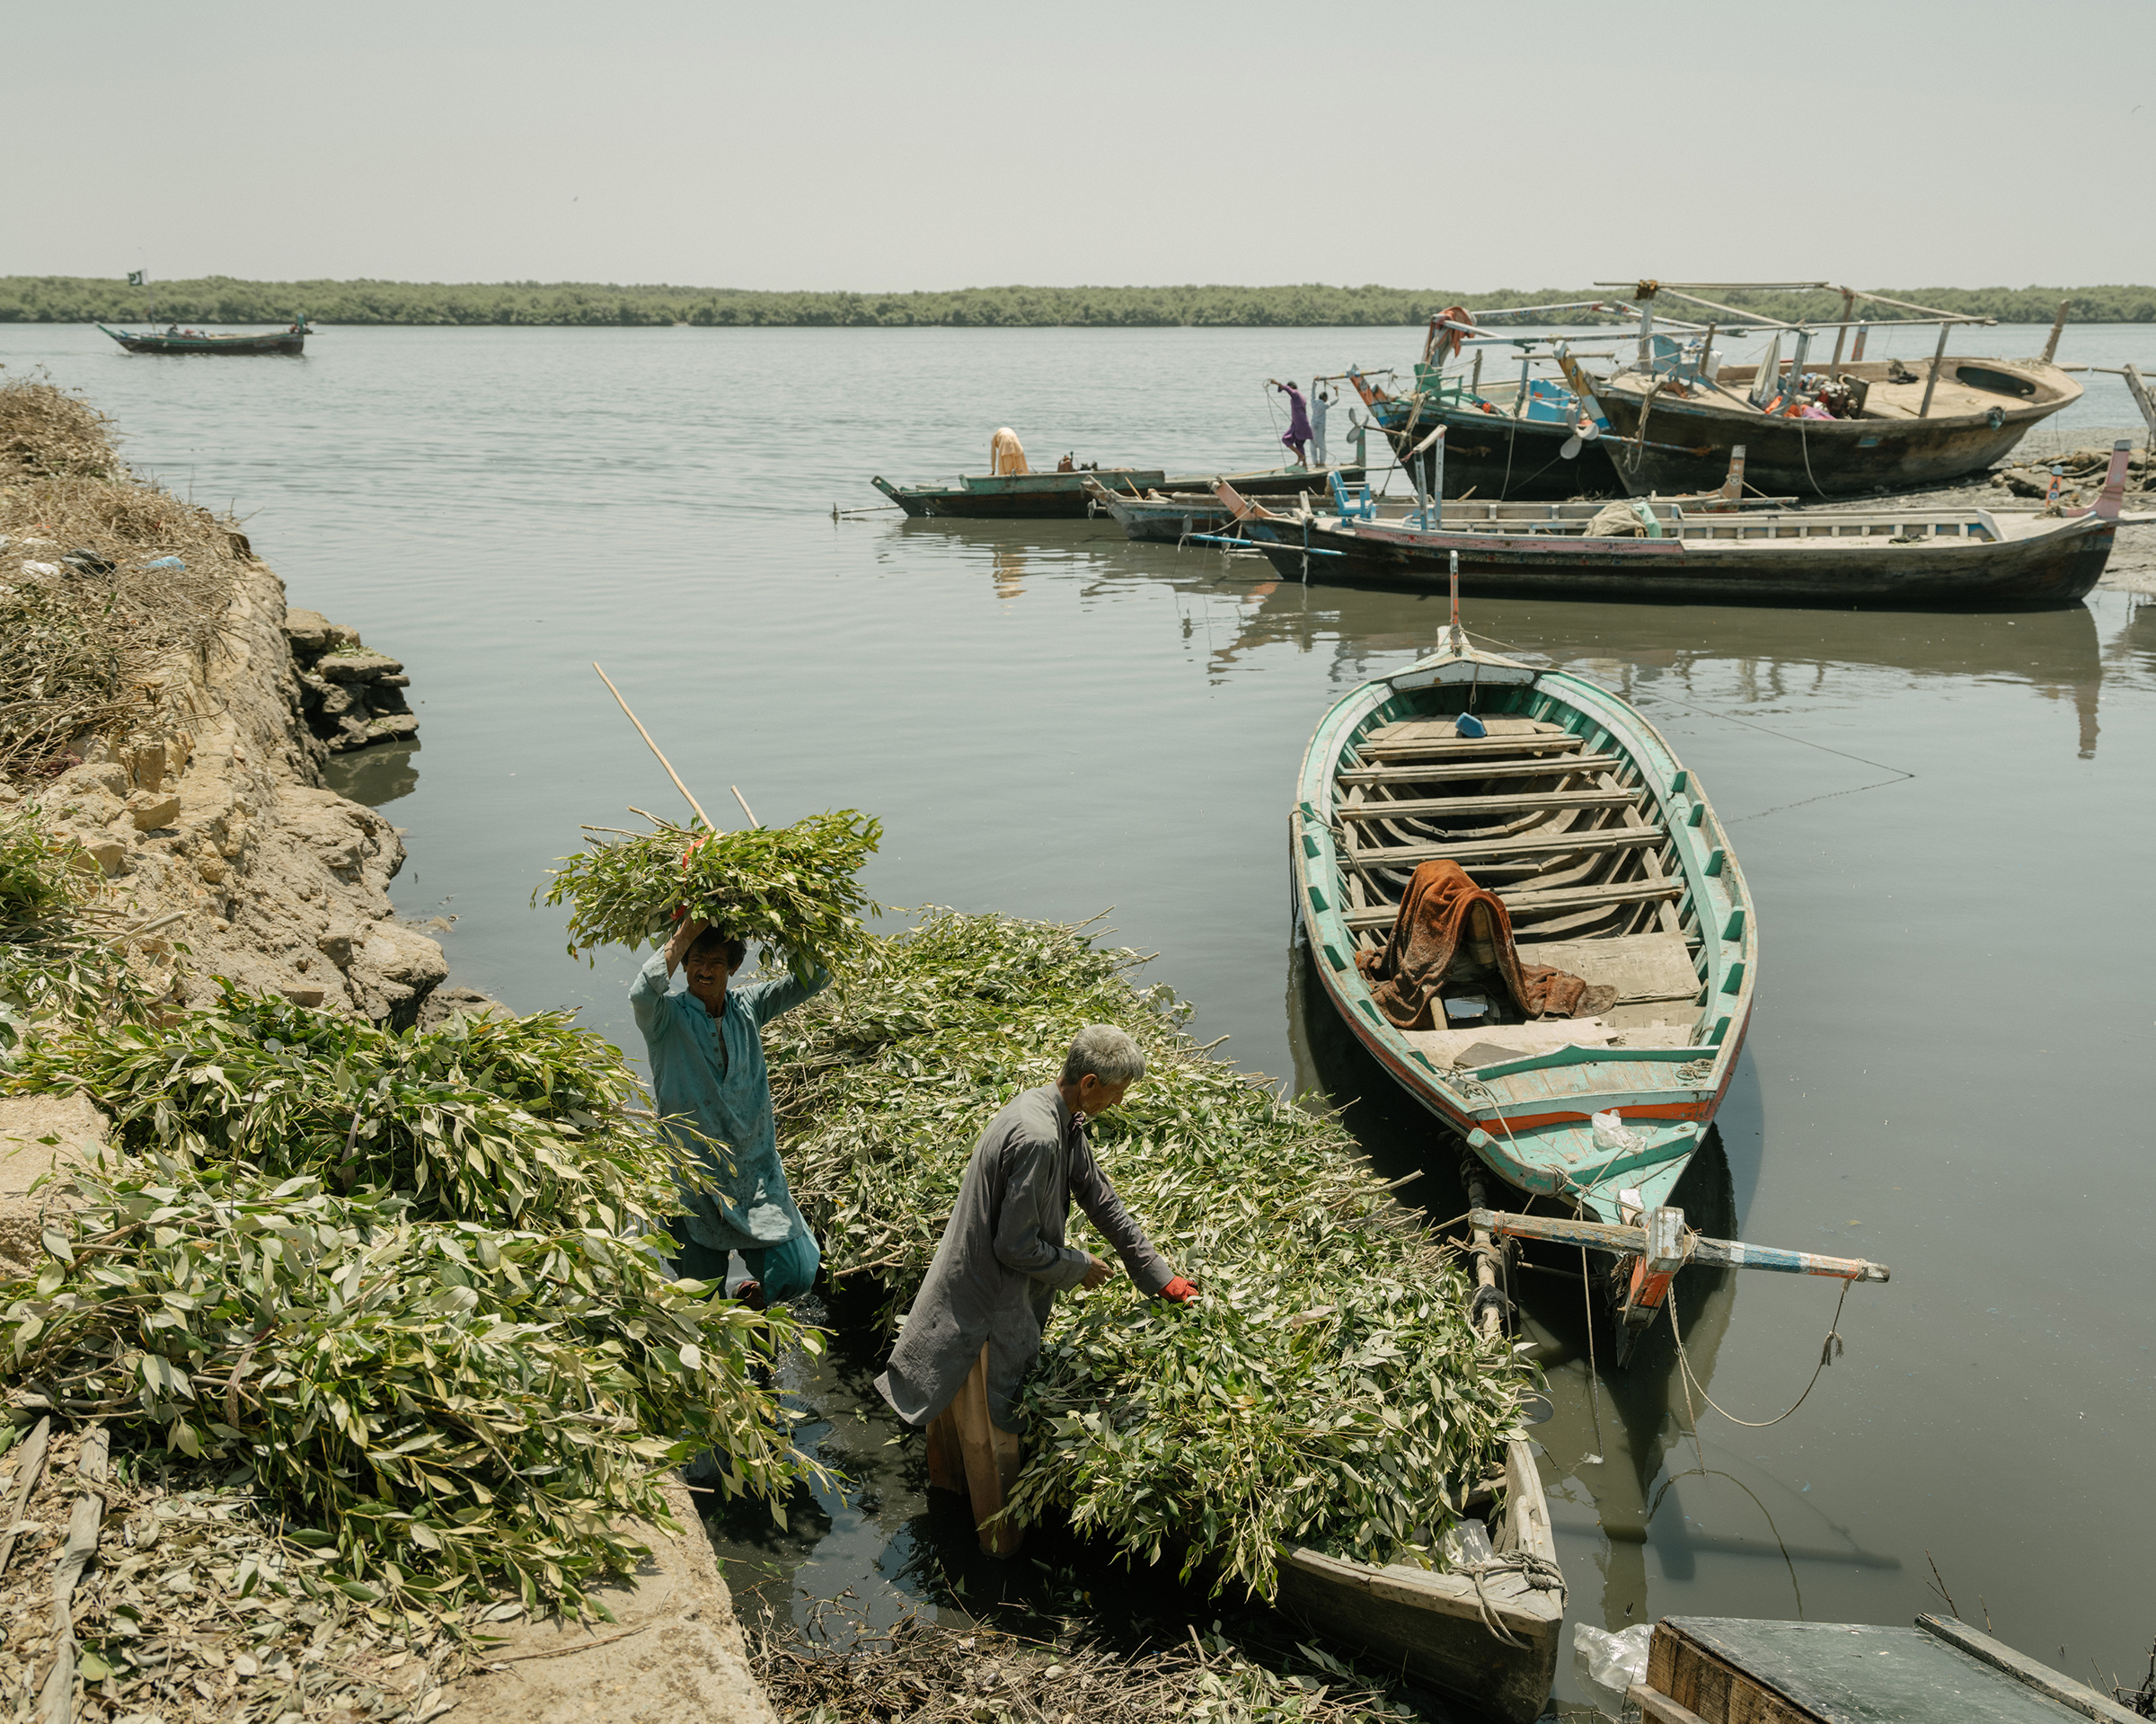 Mangrove branches and leaves are brought back to shore to feed livestock (Matthieu Paley for TIME)